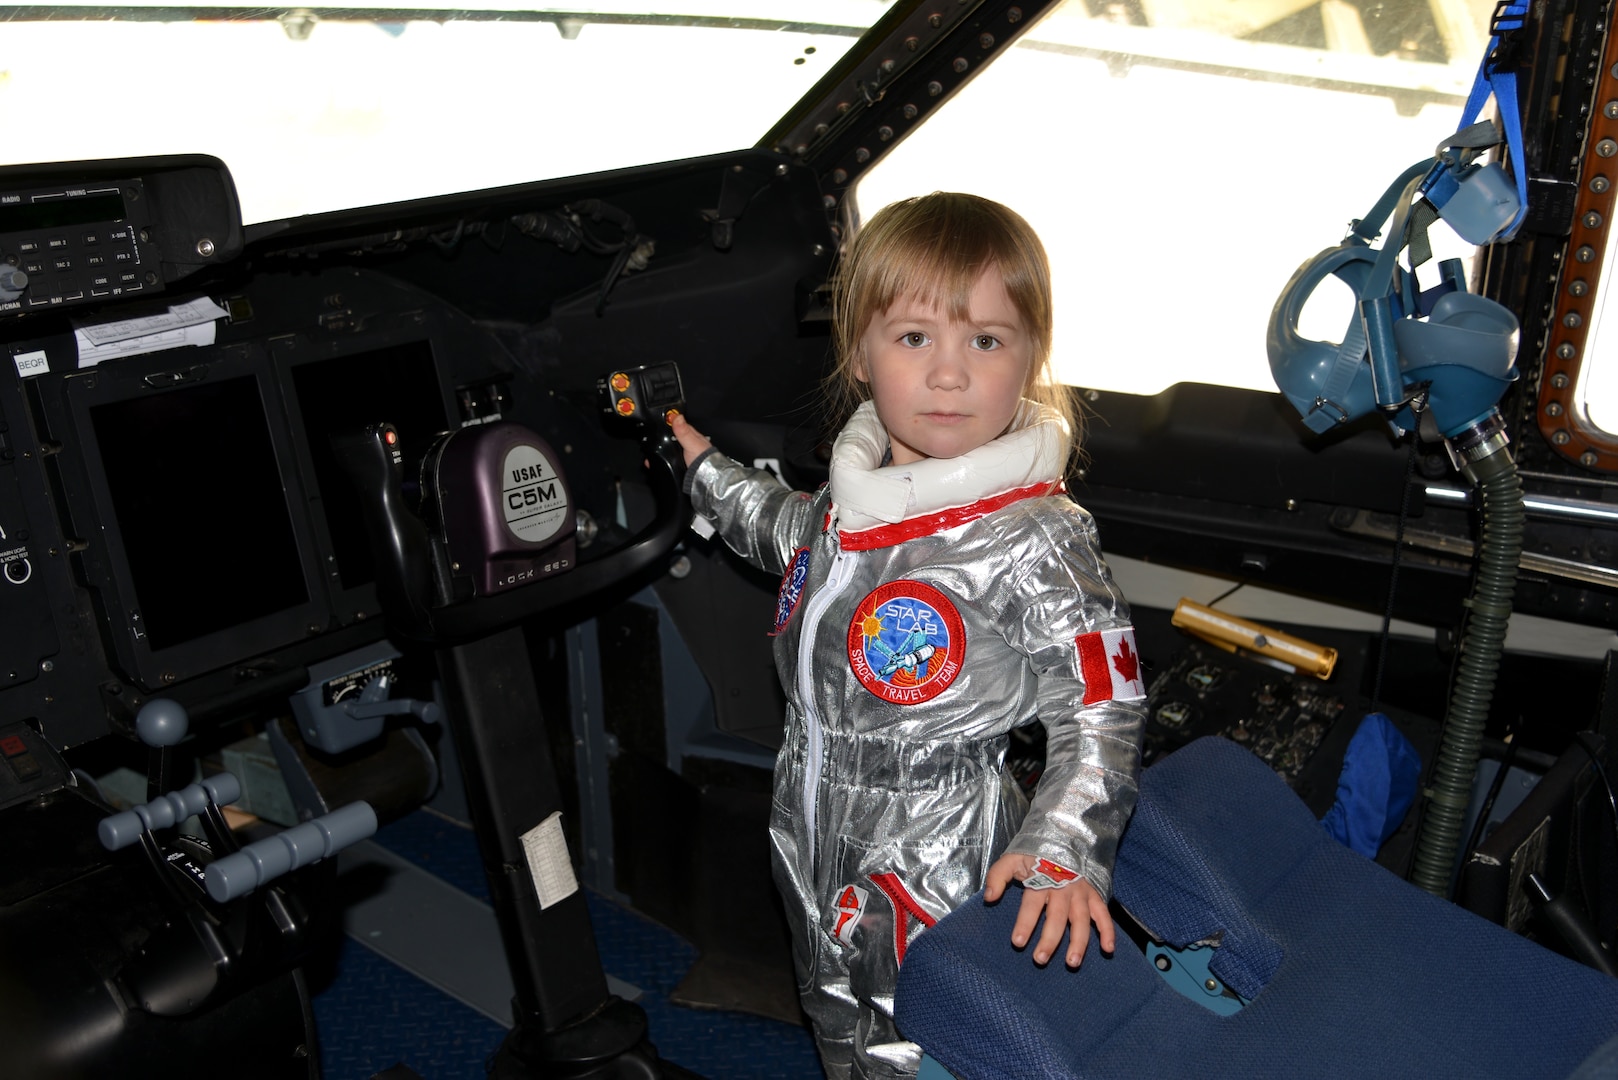 Ready for flight, 3-year-old, Victoria from British Columbia, stands inside of the 433rd Airlift Wing’s  C-5M Super Galaxy aircraft, during the Abbotsford International Airport in Abbotsford British Columbia, Canada to celebrate a week of International Women’s Day, March 10-11, 2018 during the “Sky’s the limit-Girls fly too,” Airshow. (U.S. Air Force photo by Ms. Minnie Jones)